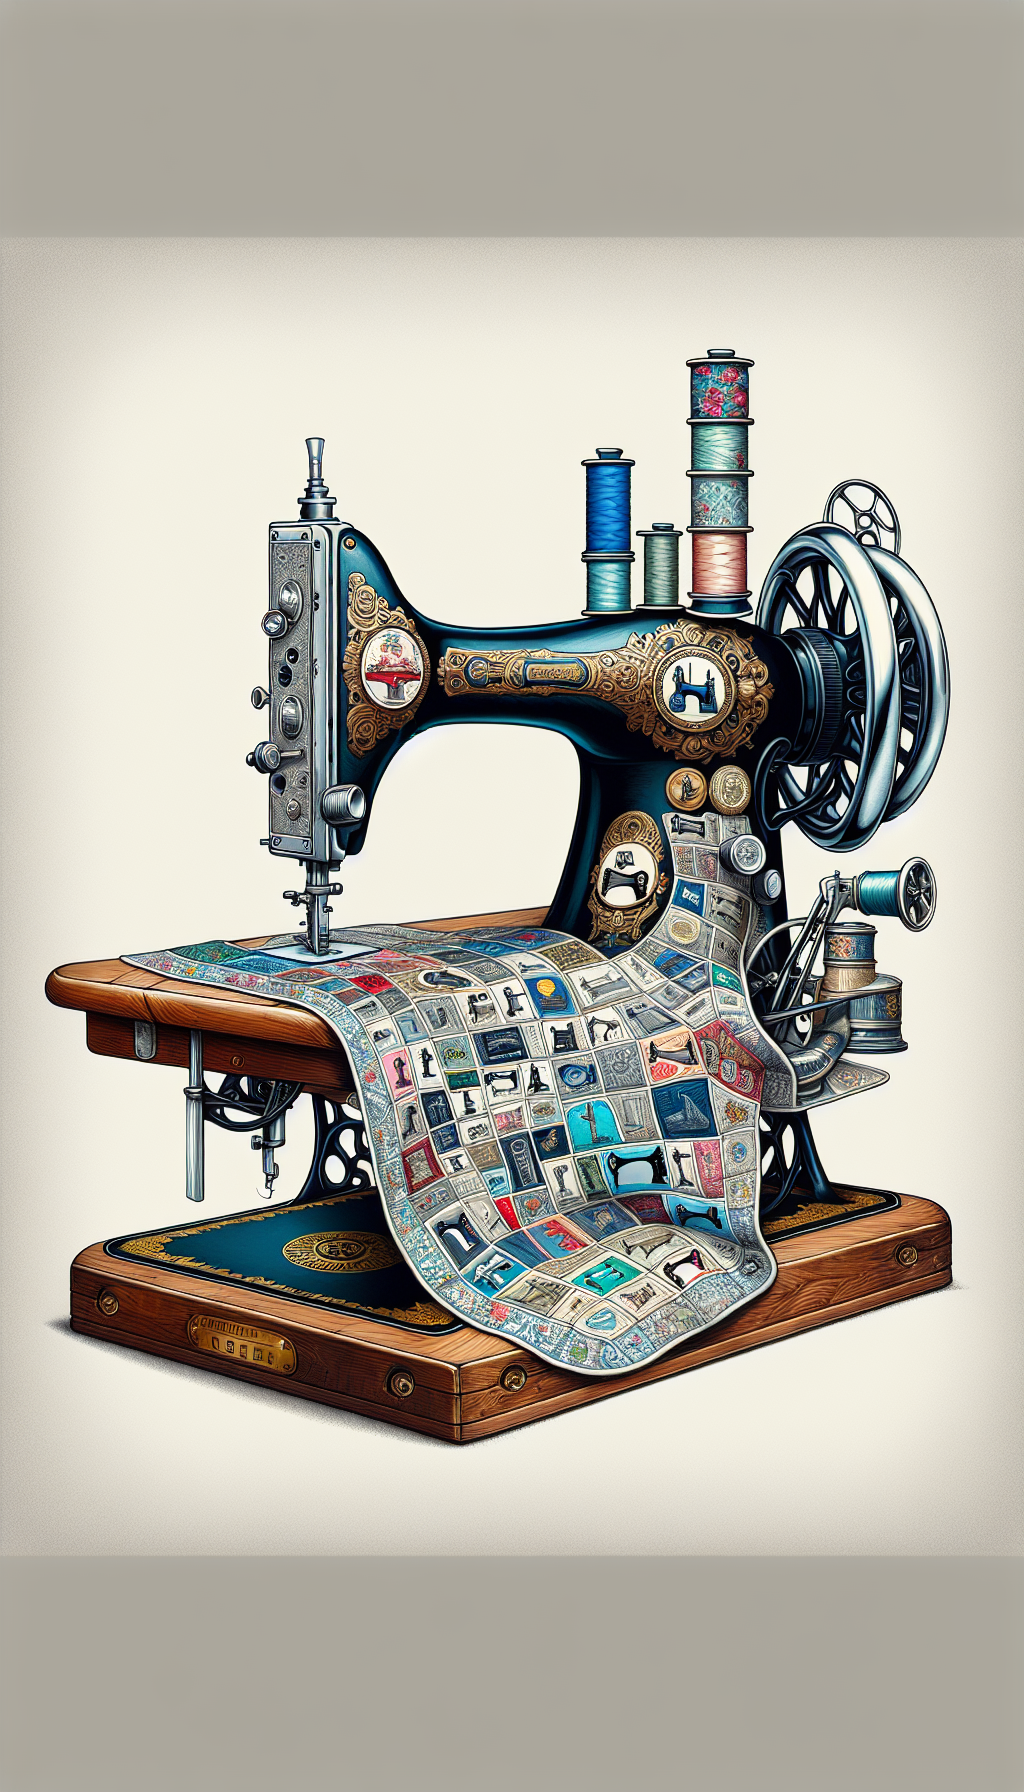 An antique sewing machine, its base formed by elegantly stacked logos of iconic sewing machine brands, supports a quilt draped over the arm. The quilt patches depict various models from each brand in contrasting artistic styles—art deco alongside pixel art, watercolor beside line art—symbolizing a tapestry of timeless value and collectibility in the world of sewing machines.